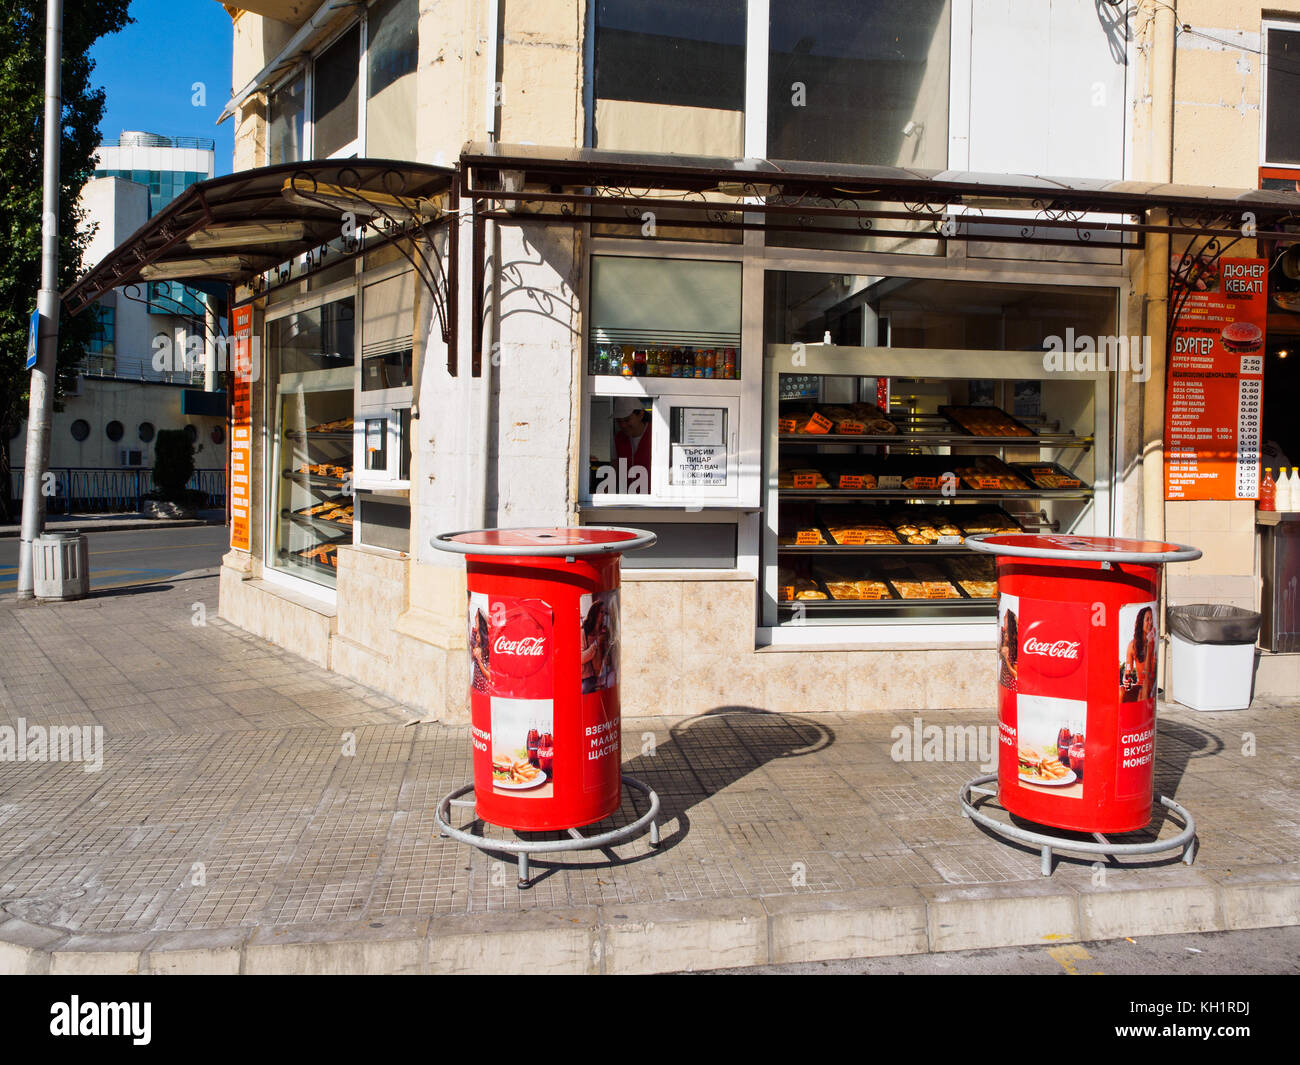 In front of a bakery shop in Haskovo, Bulgaria. Stock Photo